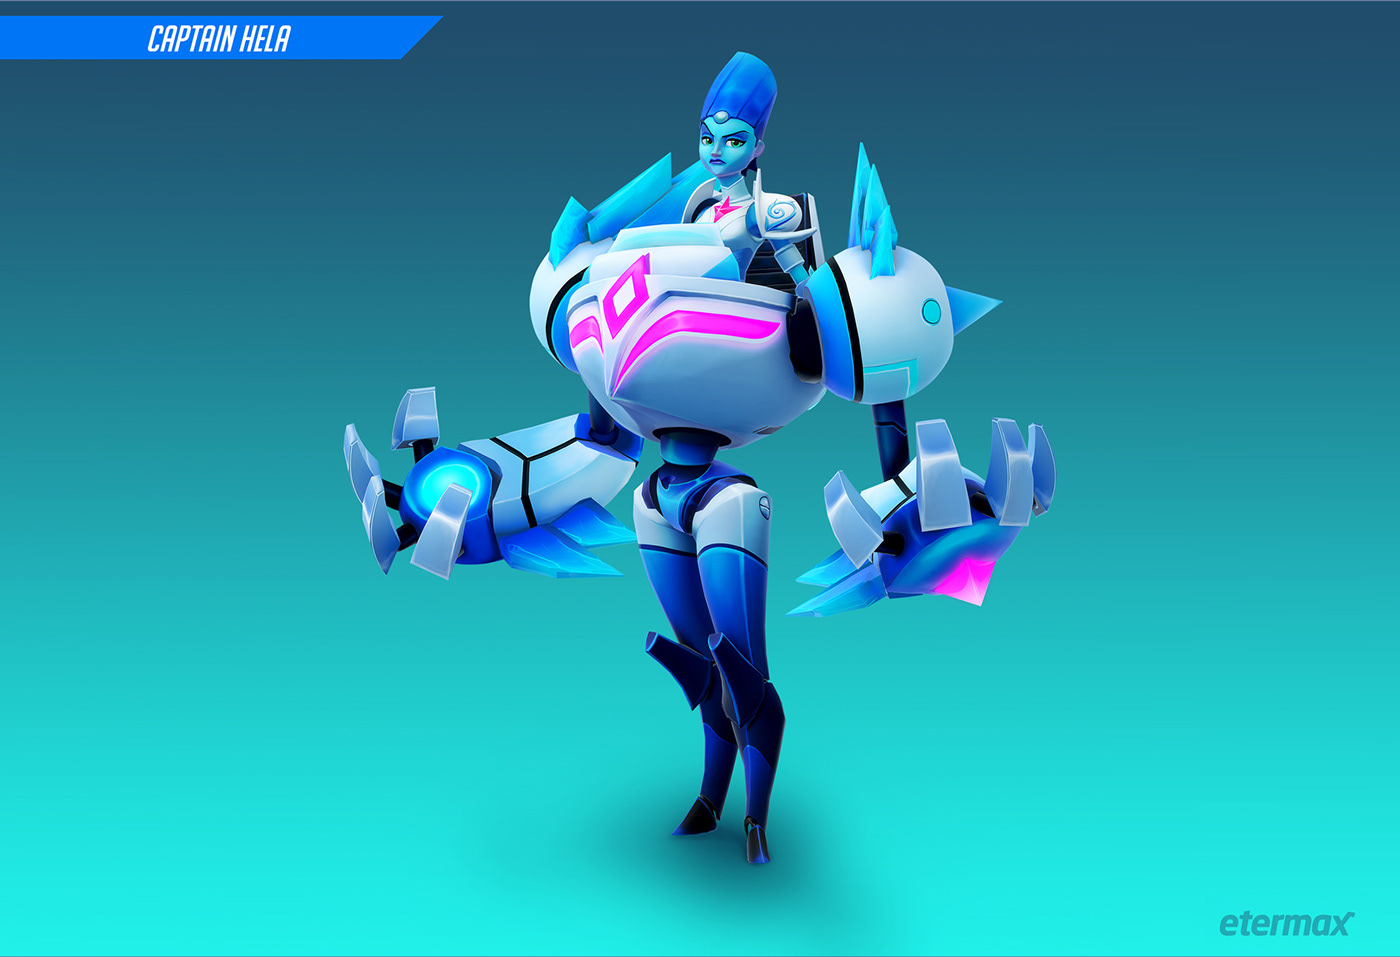 character desing texture mobile game ice queen captain Lady robot mecha